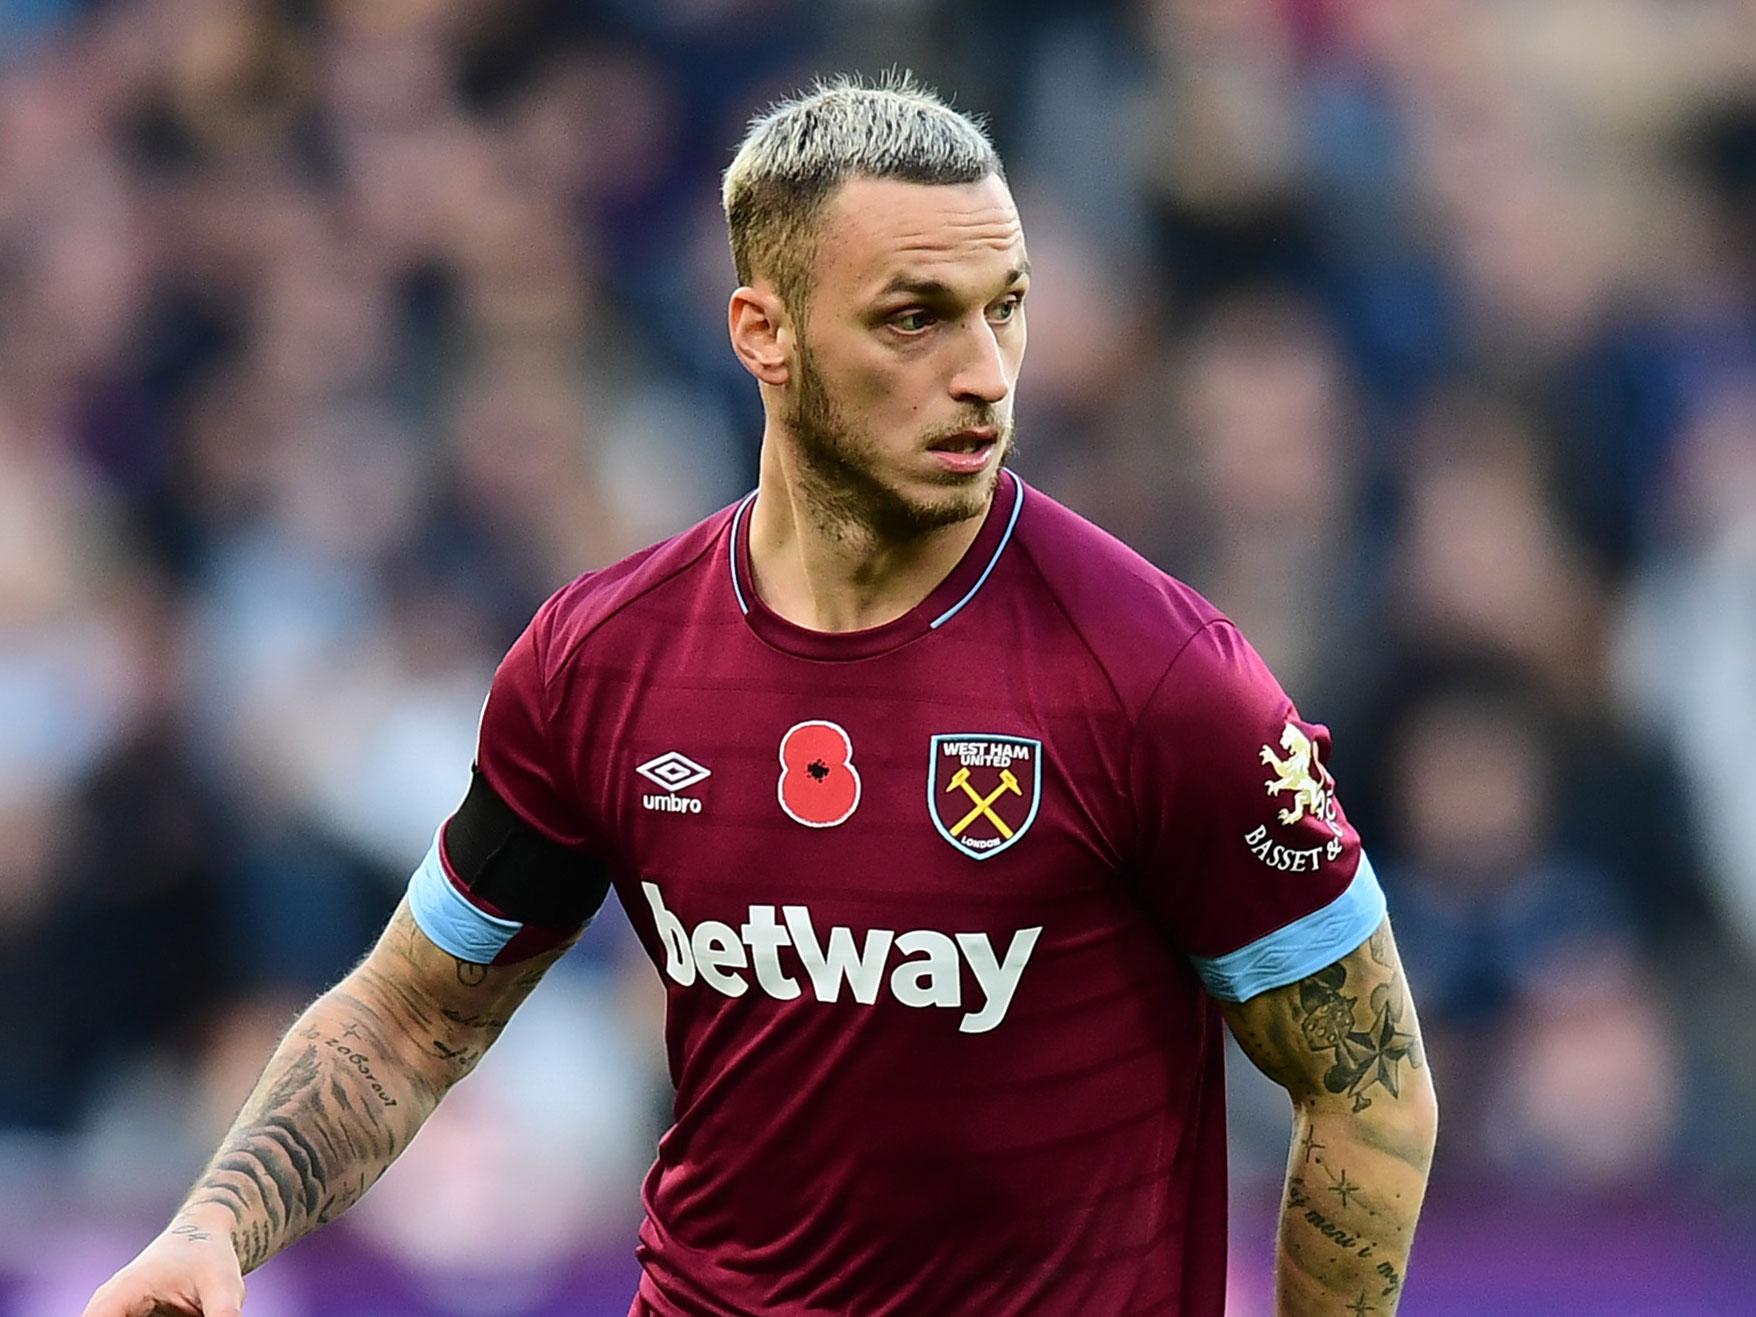 Marko Arnautovic says he&apos;s ready to leave West Ham to challenge himself against &apos;the best players&apos;